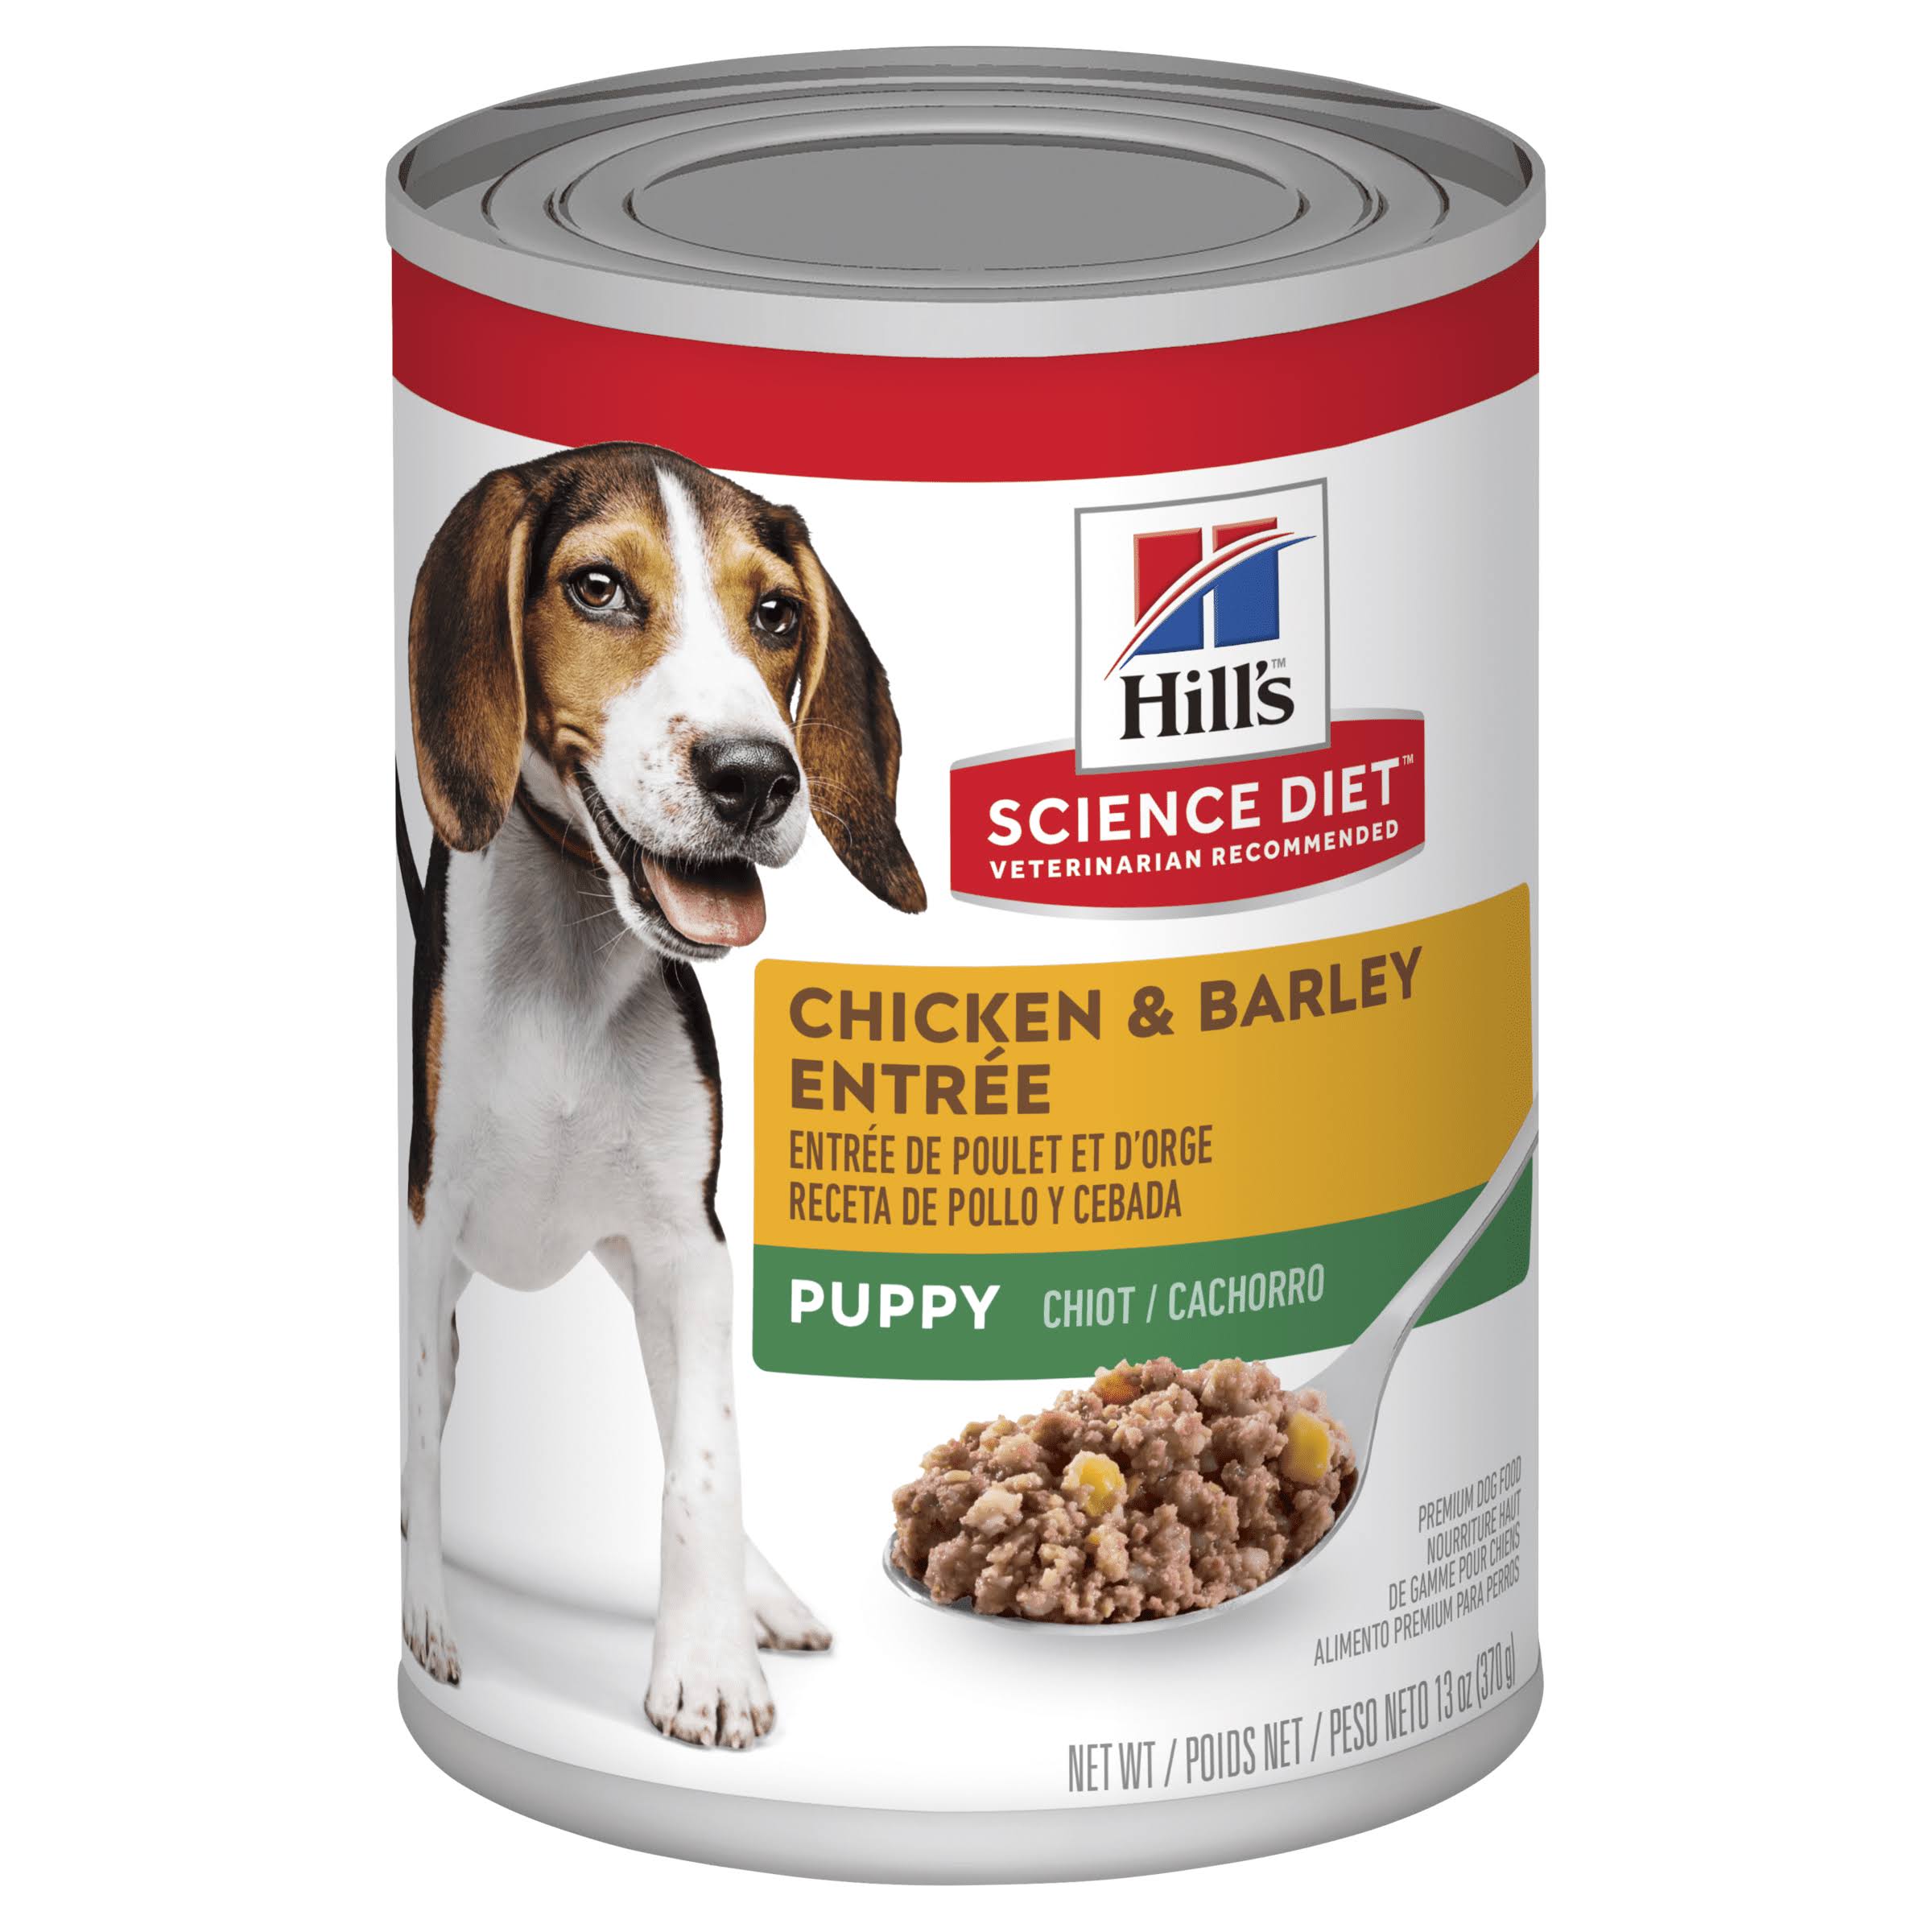 Hill's Science Diet Puppy Canned Dog Food - Chicken and Barley Entre, 13oz